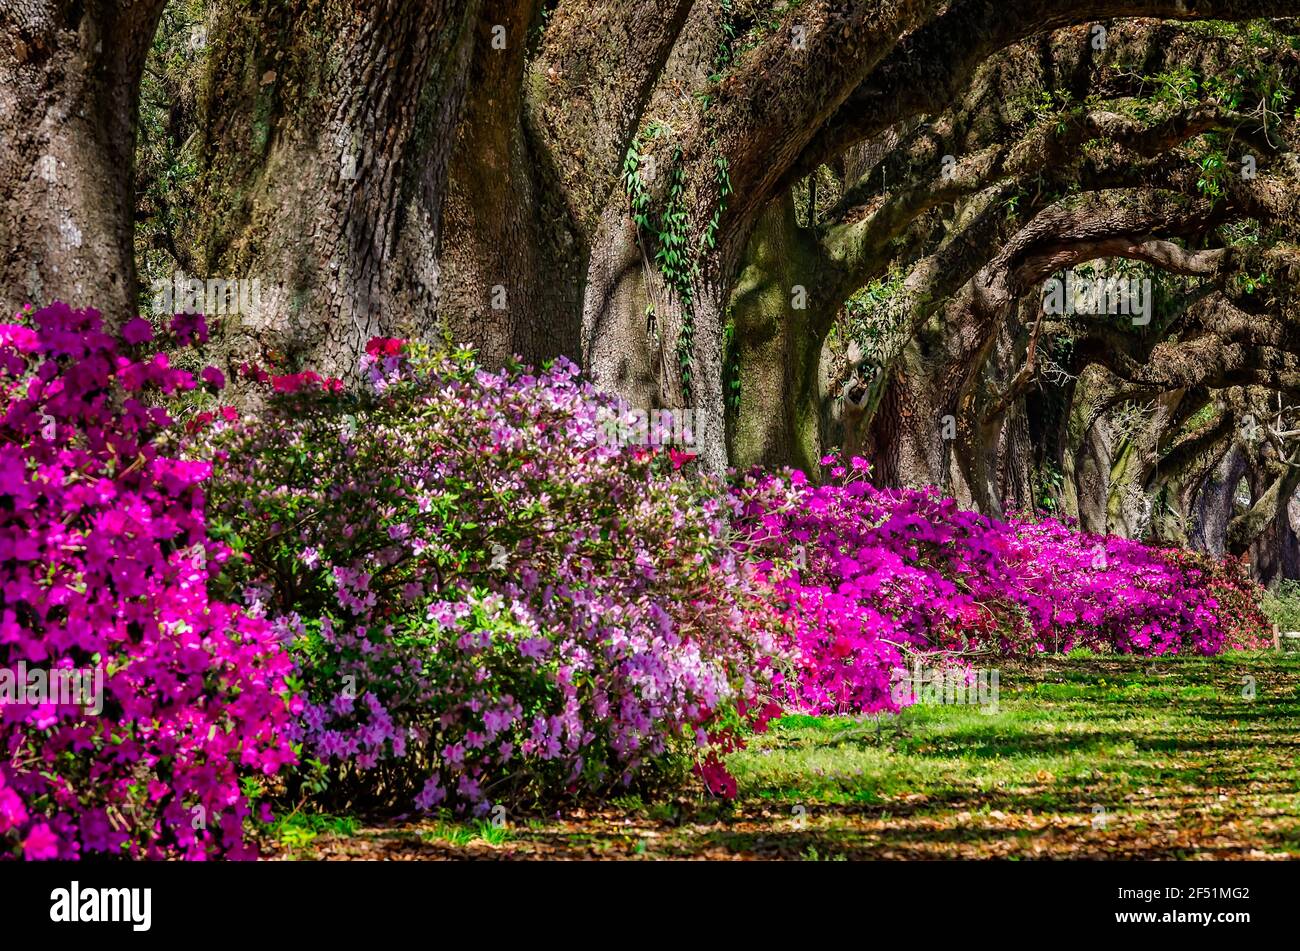 Pink azaleas bloom along the Avenue of Oaks at Spring Hill College, March 21, 2021, in Mobile, Alabama. Mobile is known as the Azalea City. Stock Photo